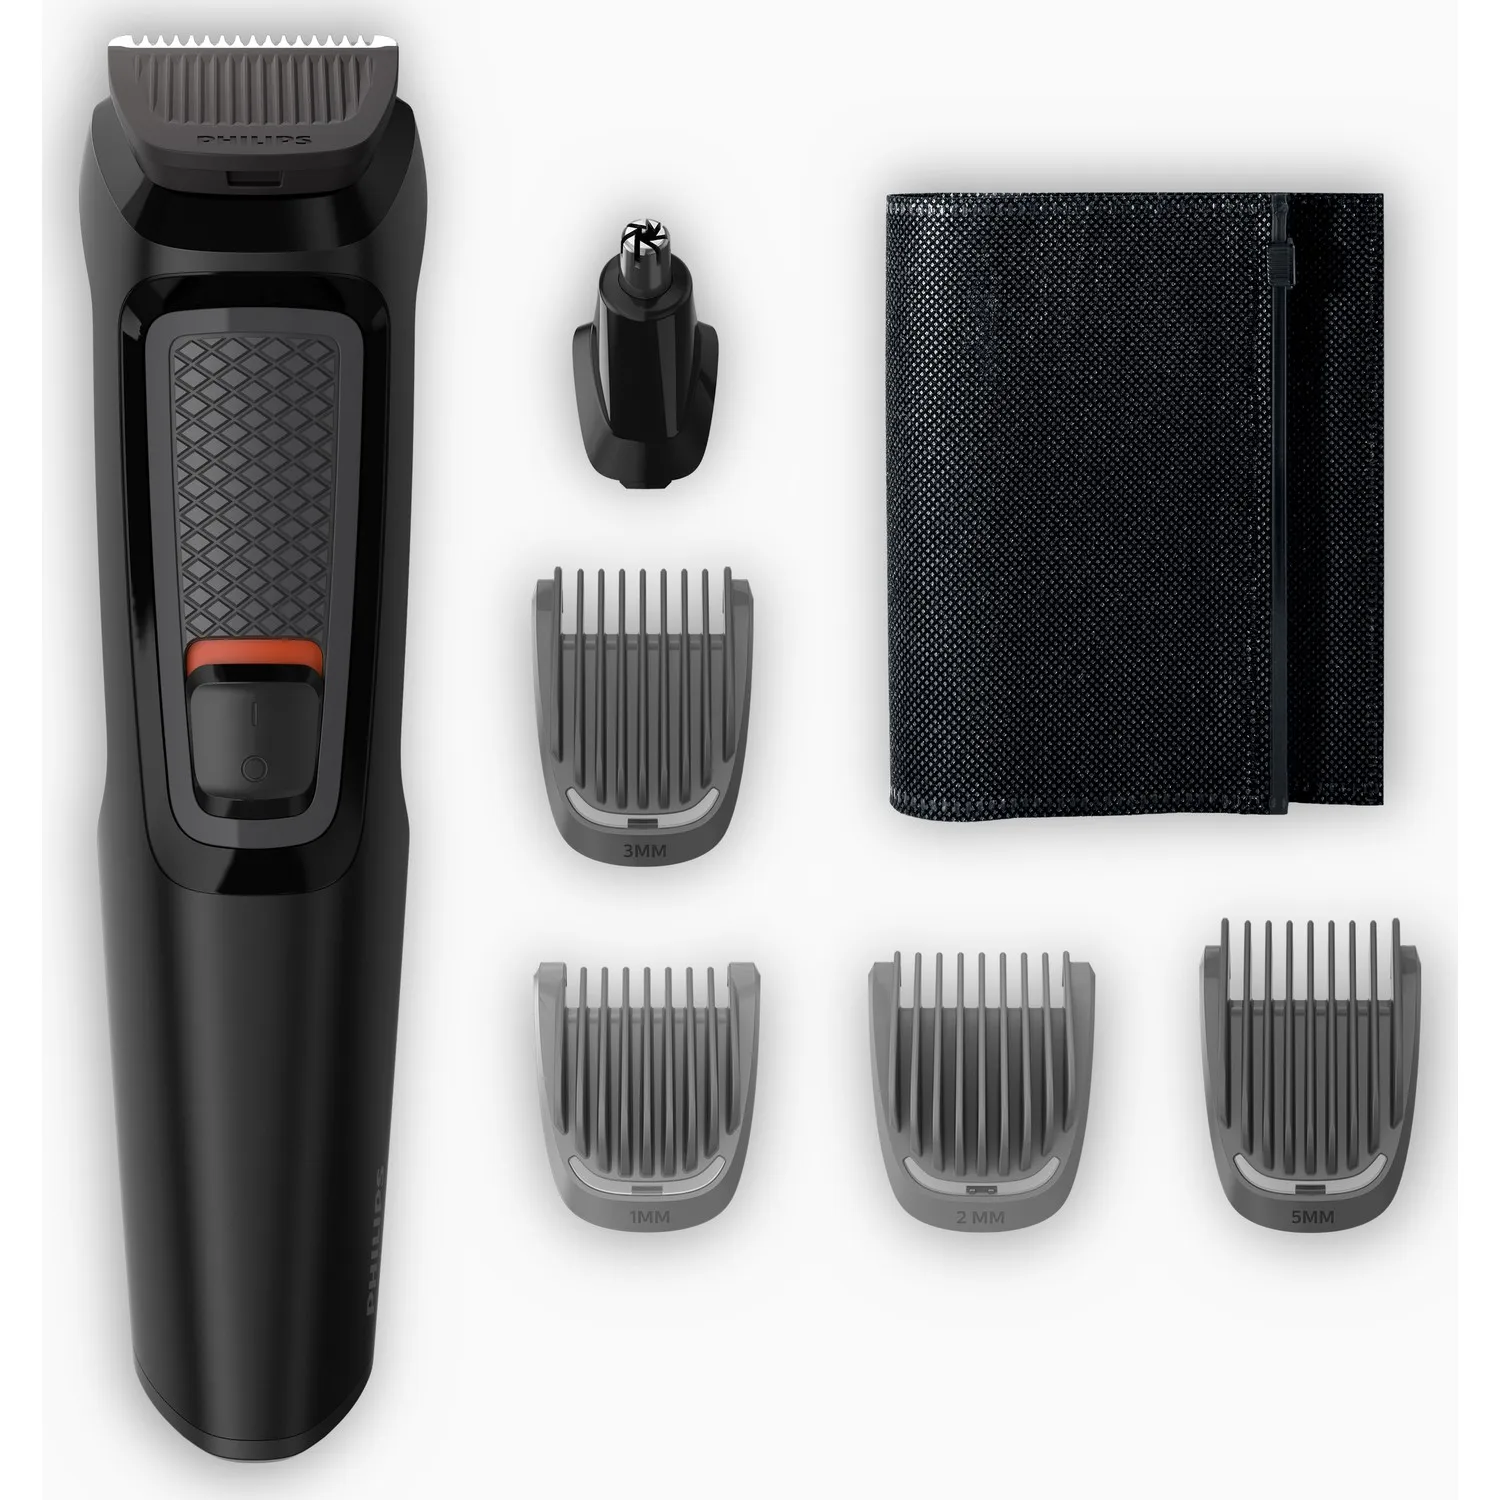 Original PHILIPS MG3710/15 6n1 Rechargeable Electric Shaver HairClipper Beard Trimmer Cordless Washable Waterproof Razor For Men